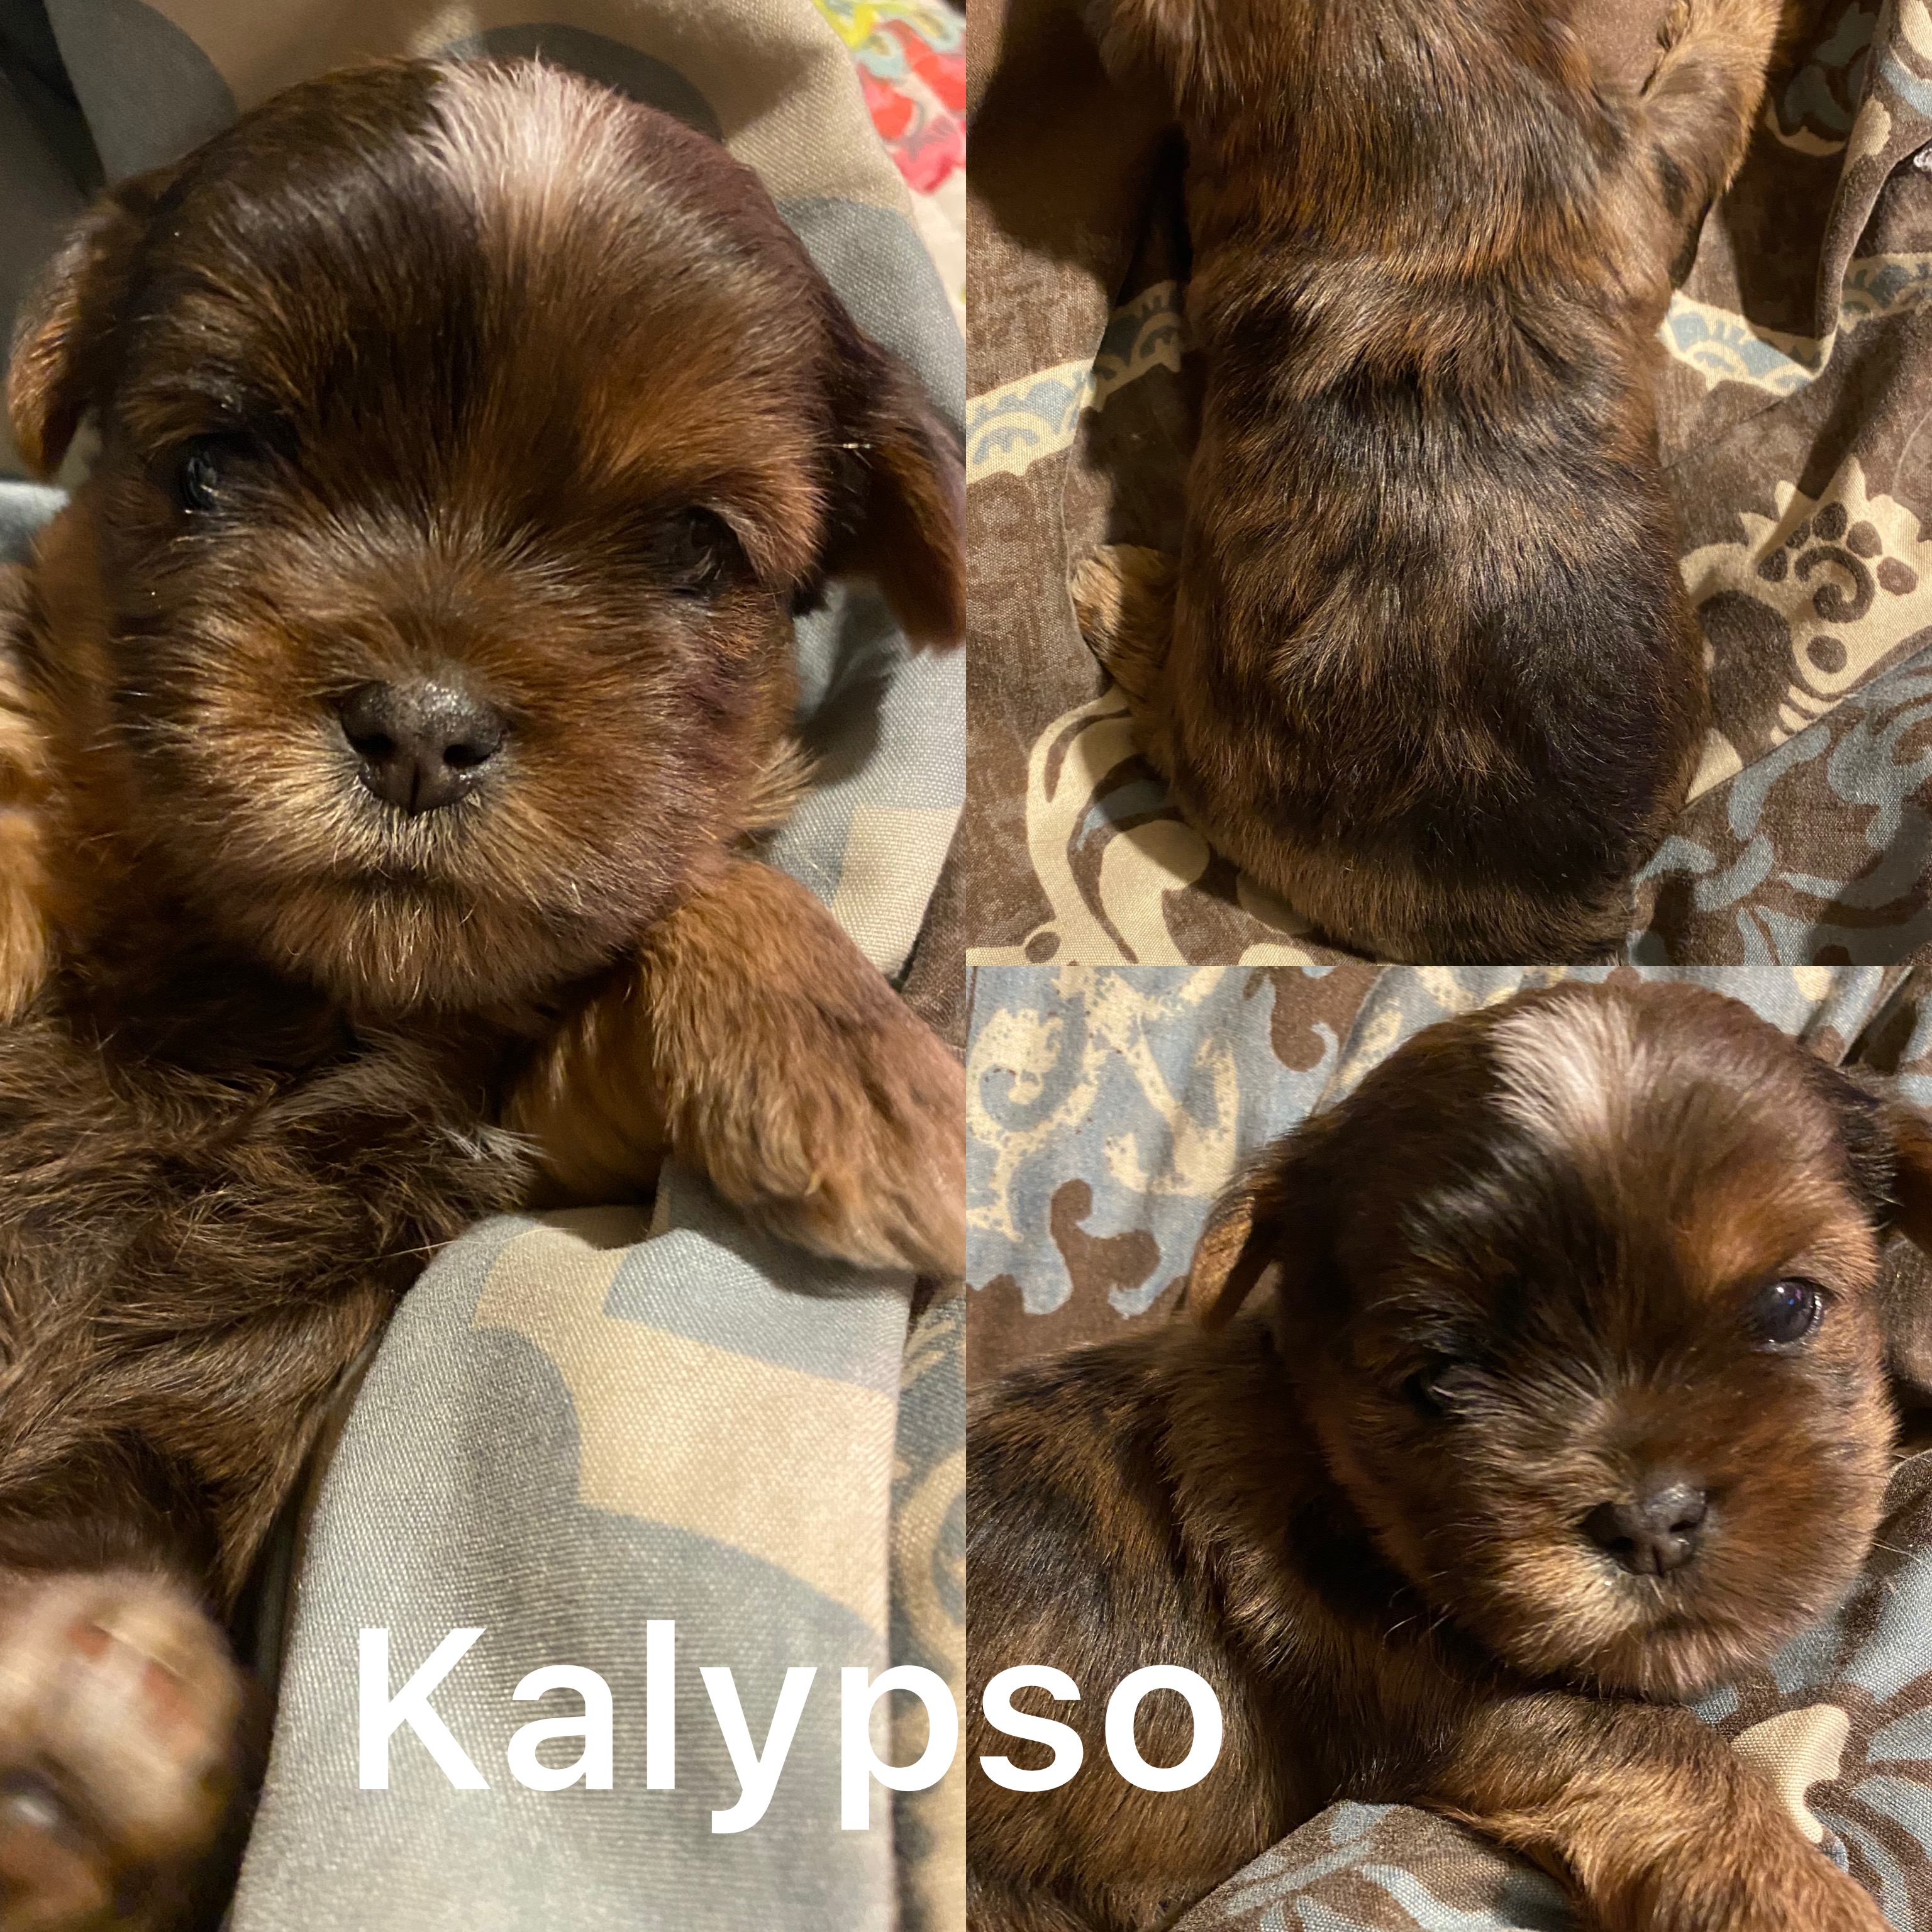 Kalypso is ADOPTED! Not available